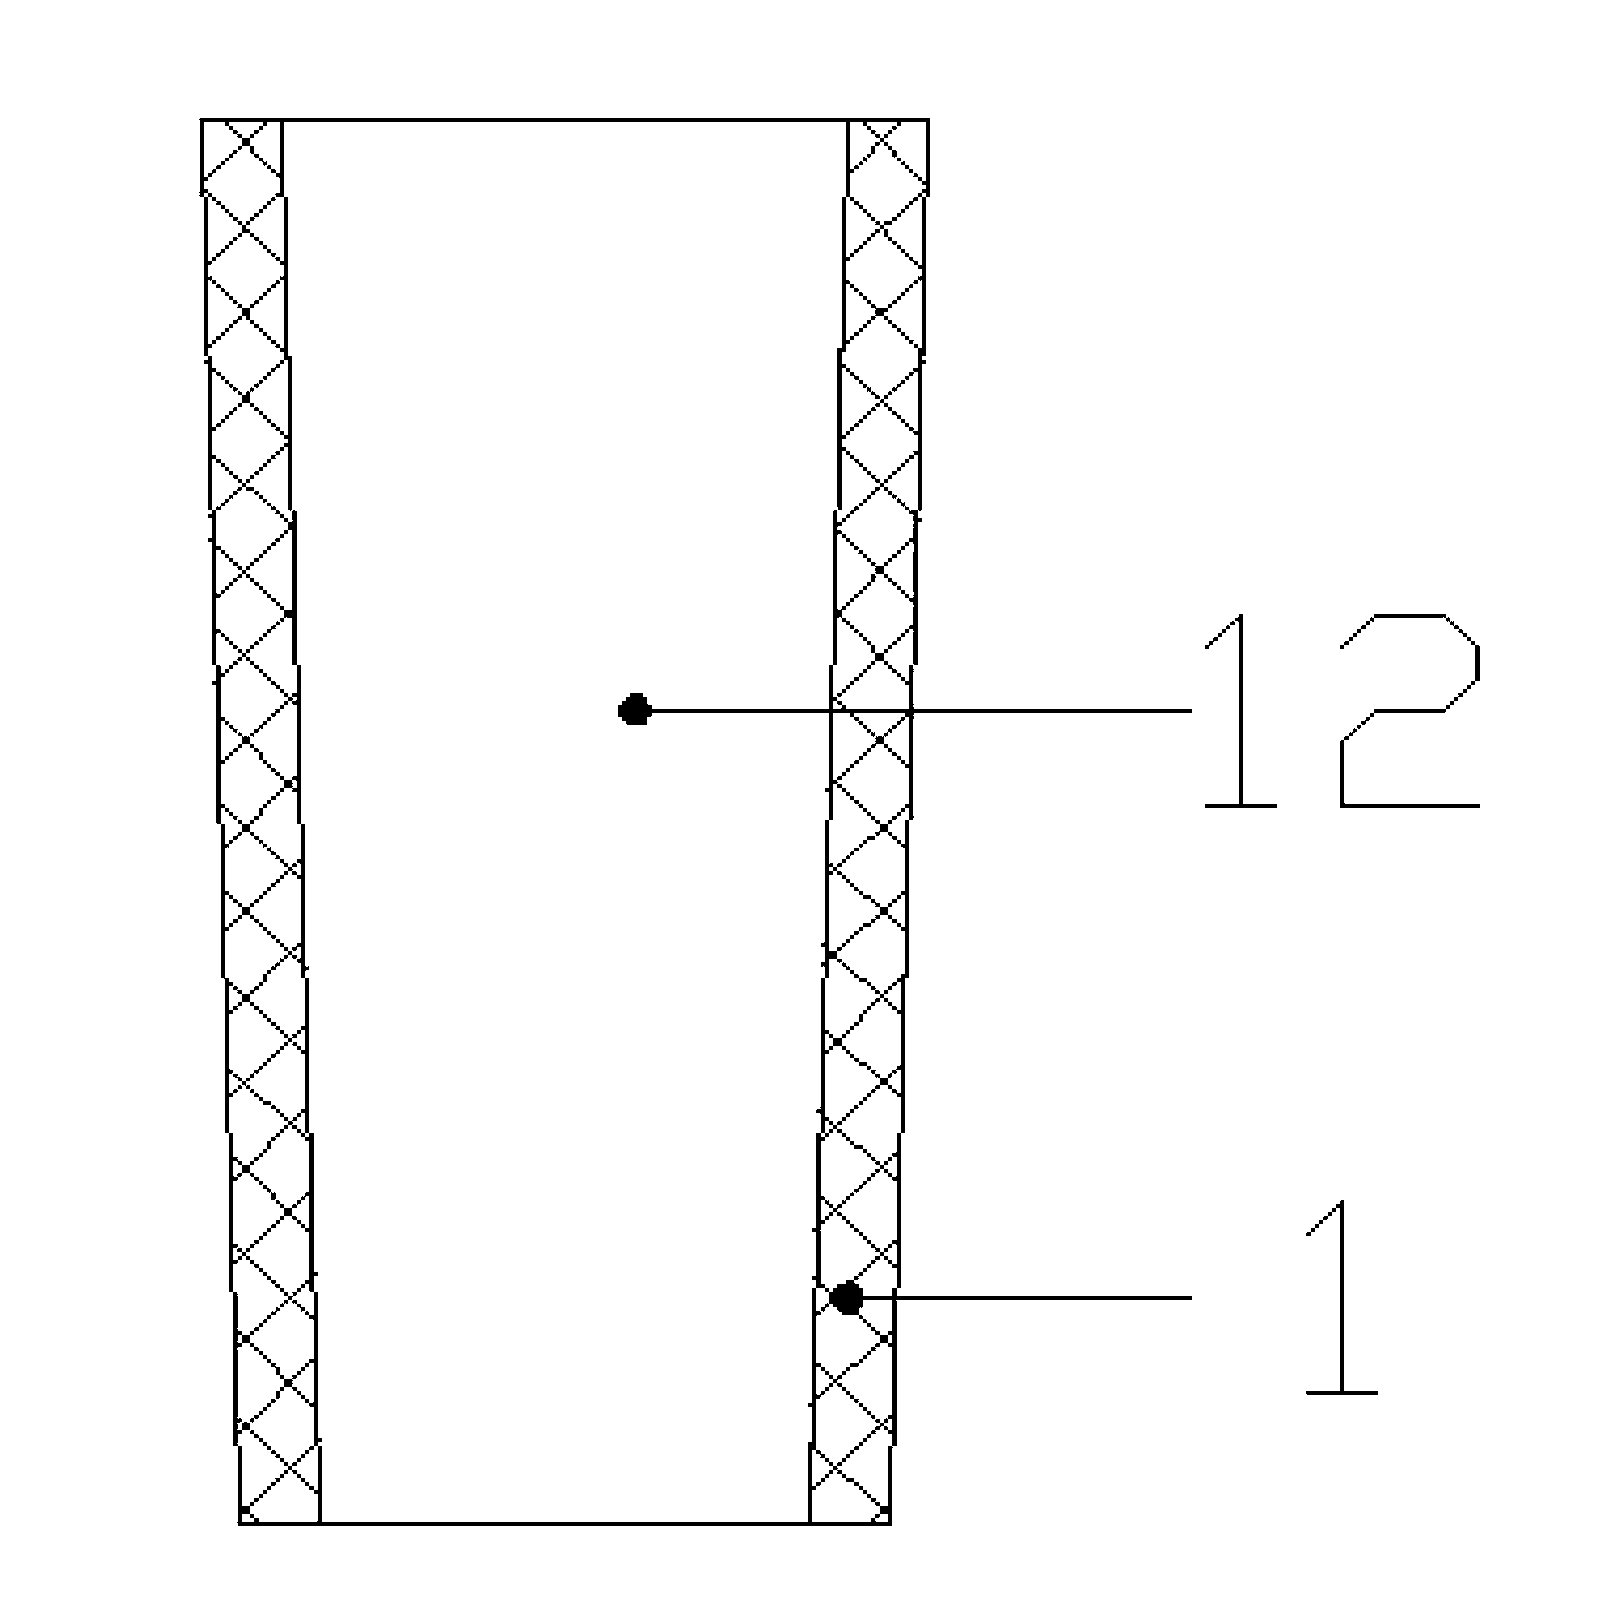 Production method for partitioned unit glued lattice structural bodies of graphic fireworks